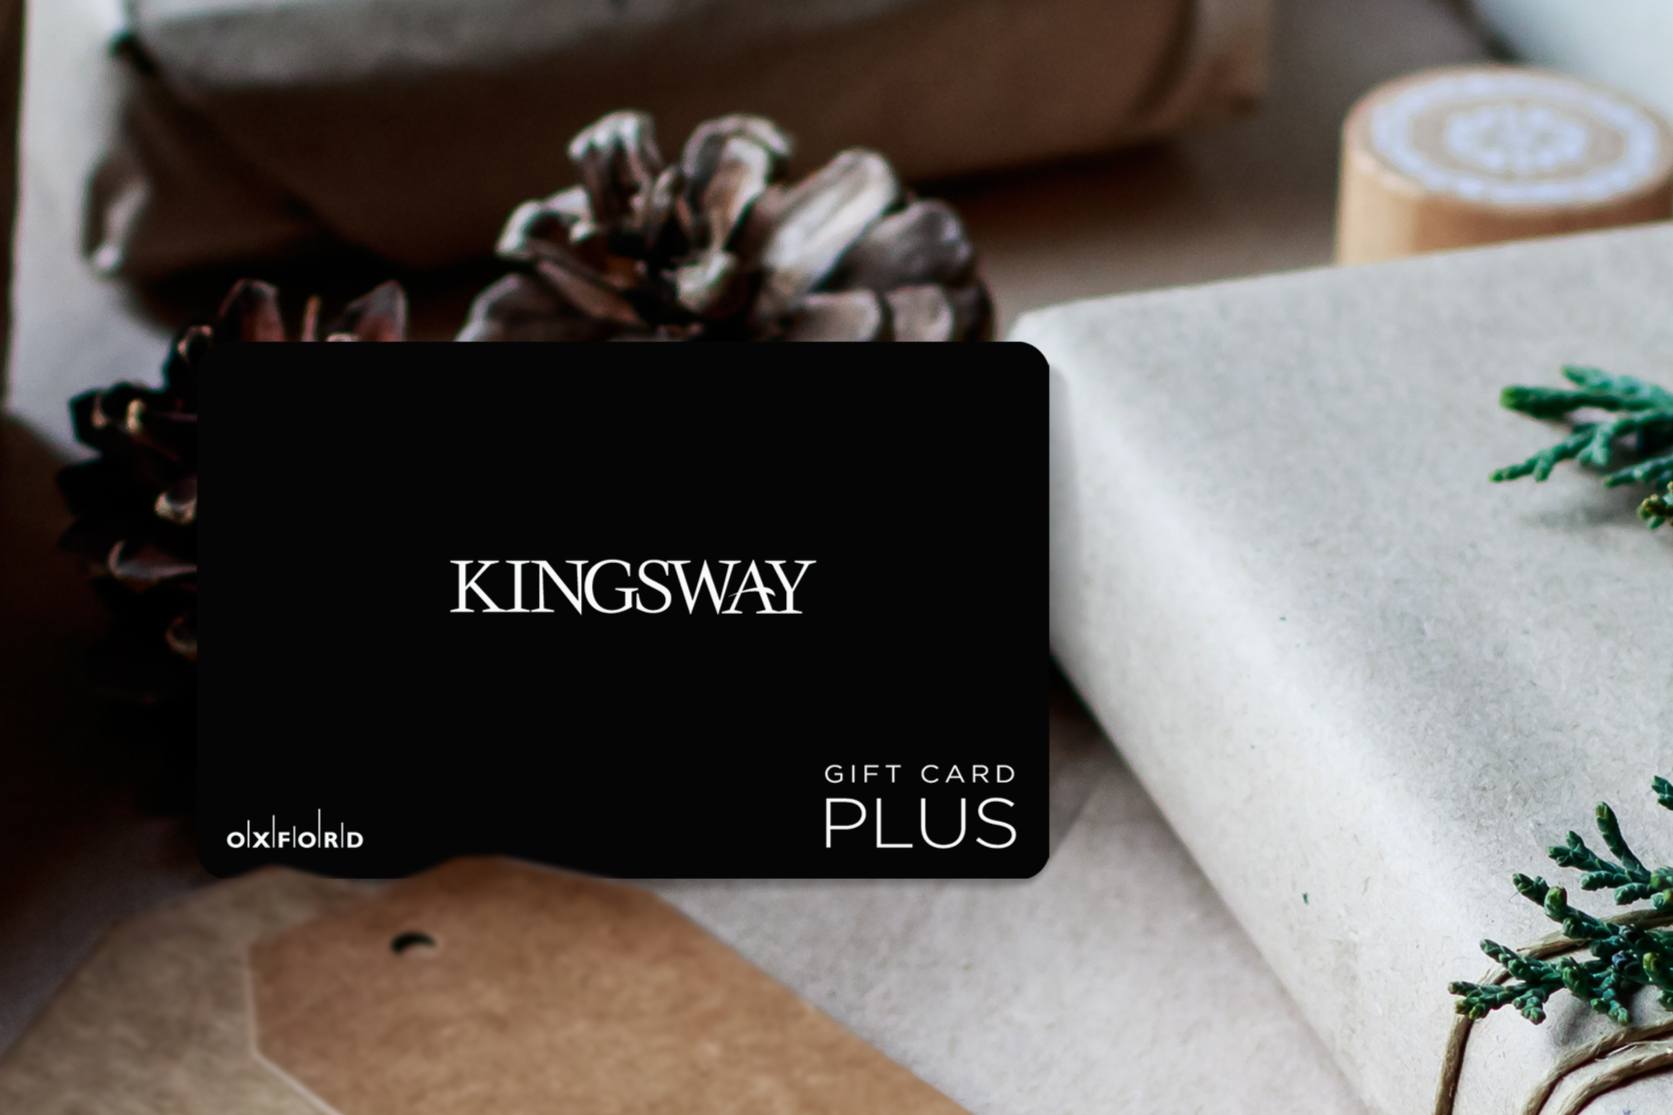 promotional image of a black Kingsway gift card surrounded by gift-wrapped books in a holiday setting